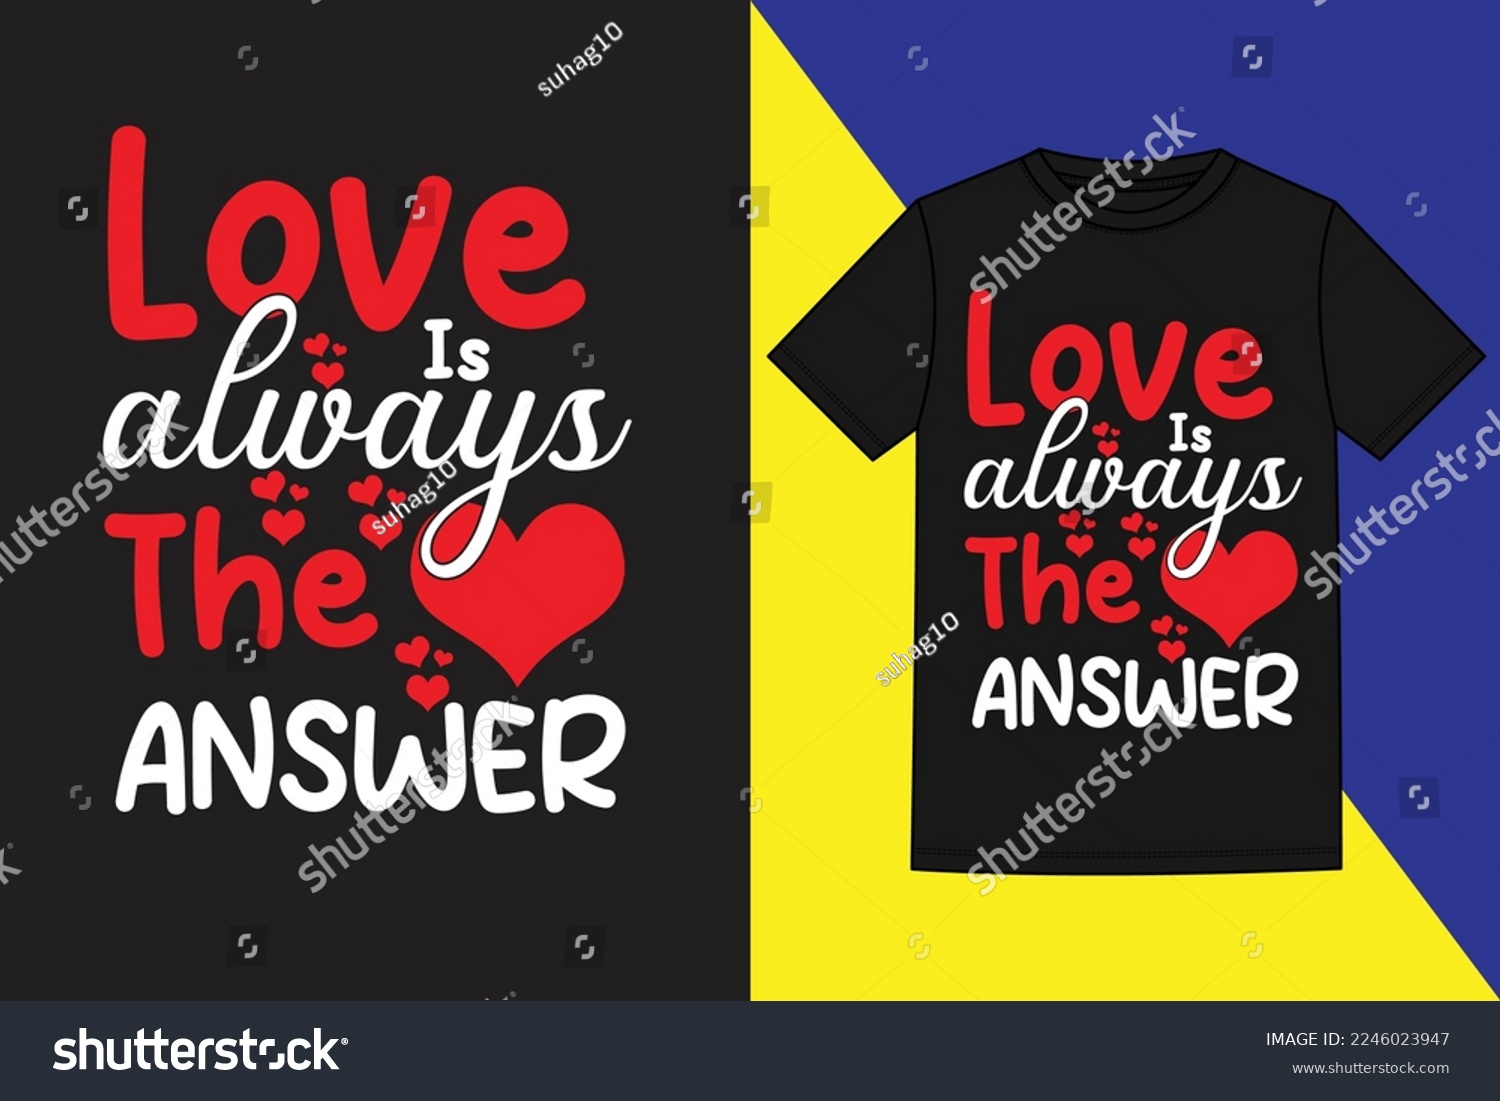 SVG of love is always the answer t shirt, valentine's day t shirt,t-shirt design. Unique Valentine Typography quote design. Valentine designs for poster, print, t-shirt, mug, bag, and for POD. svg